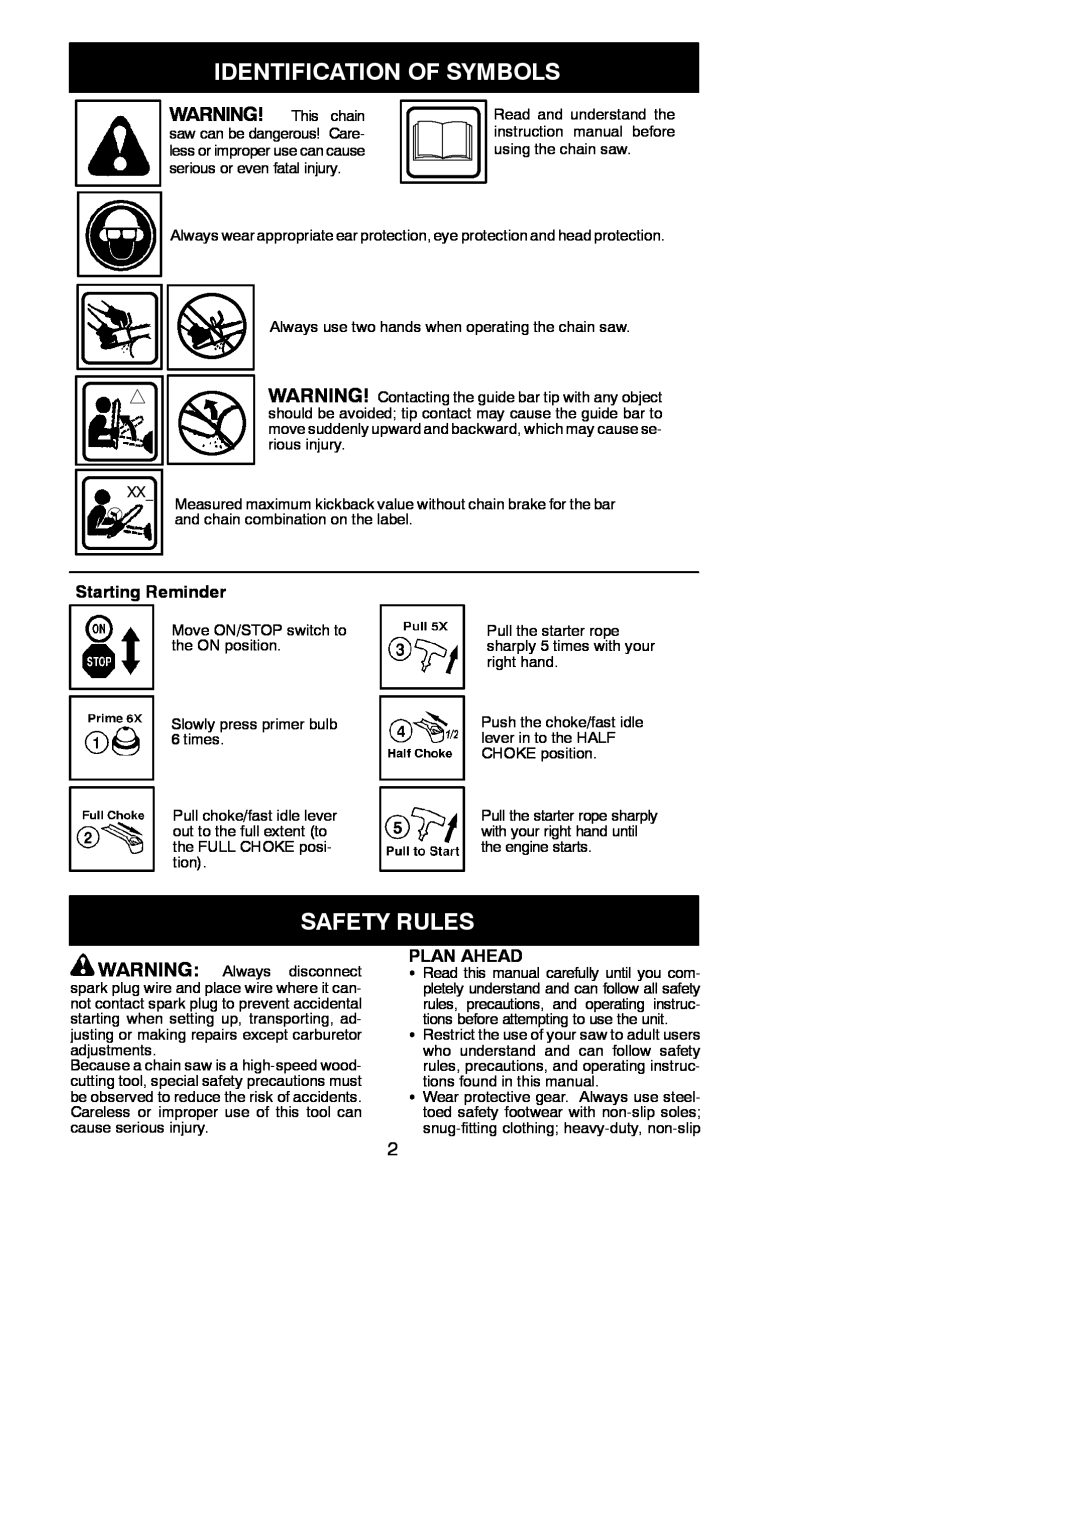 Poulan PP3516, PP4018 instruction manual Identification Of Symbols, Safety Rules, Starting Reminder, Plan Ahead 